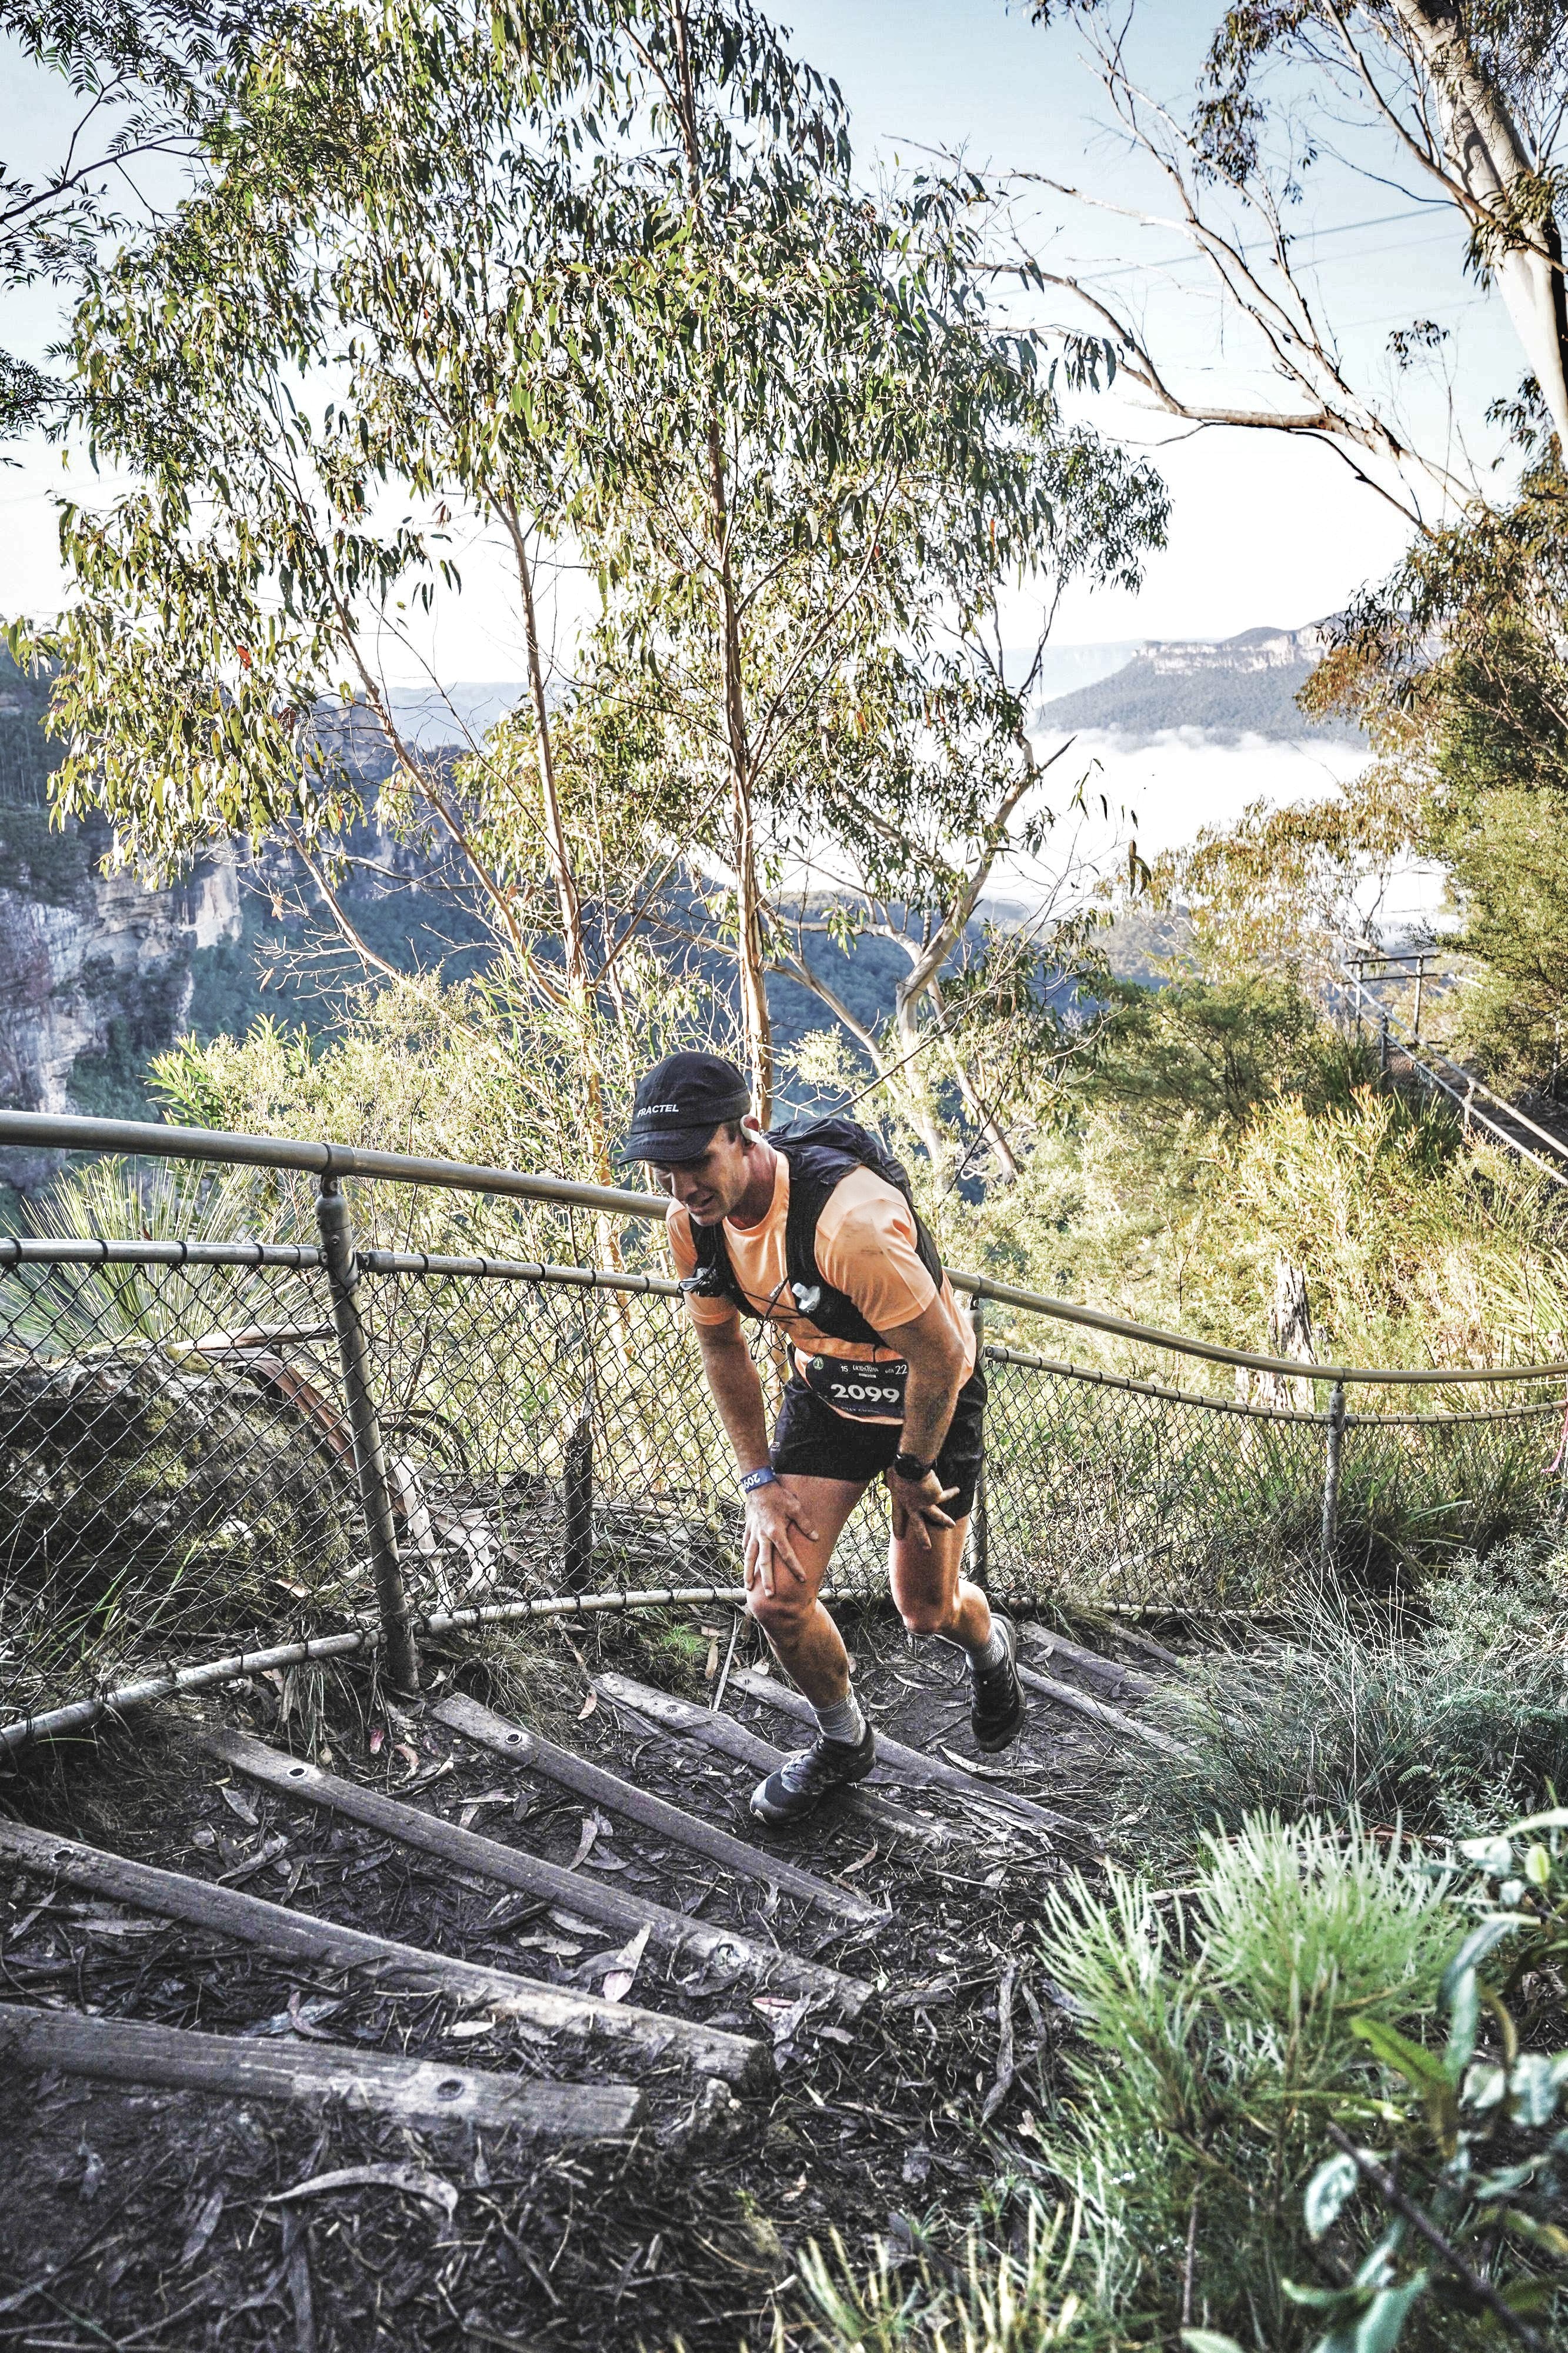 Billy Curtis takes 3rd in Ultra Trail Australia 21km Race